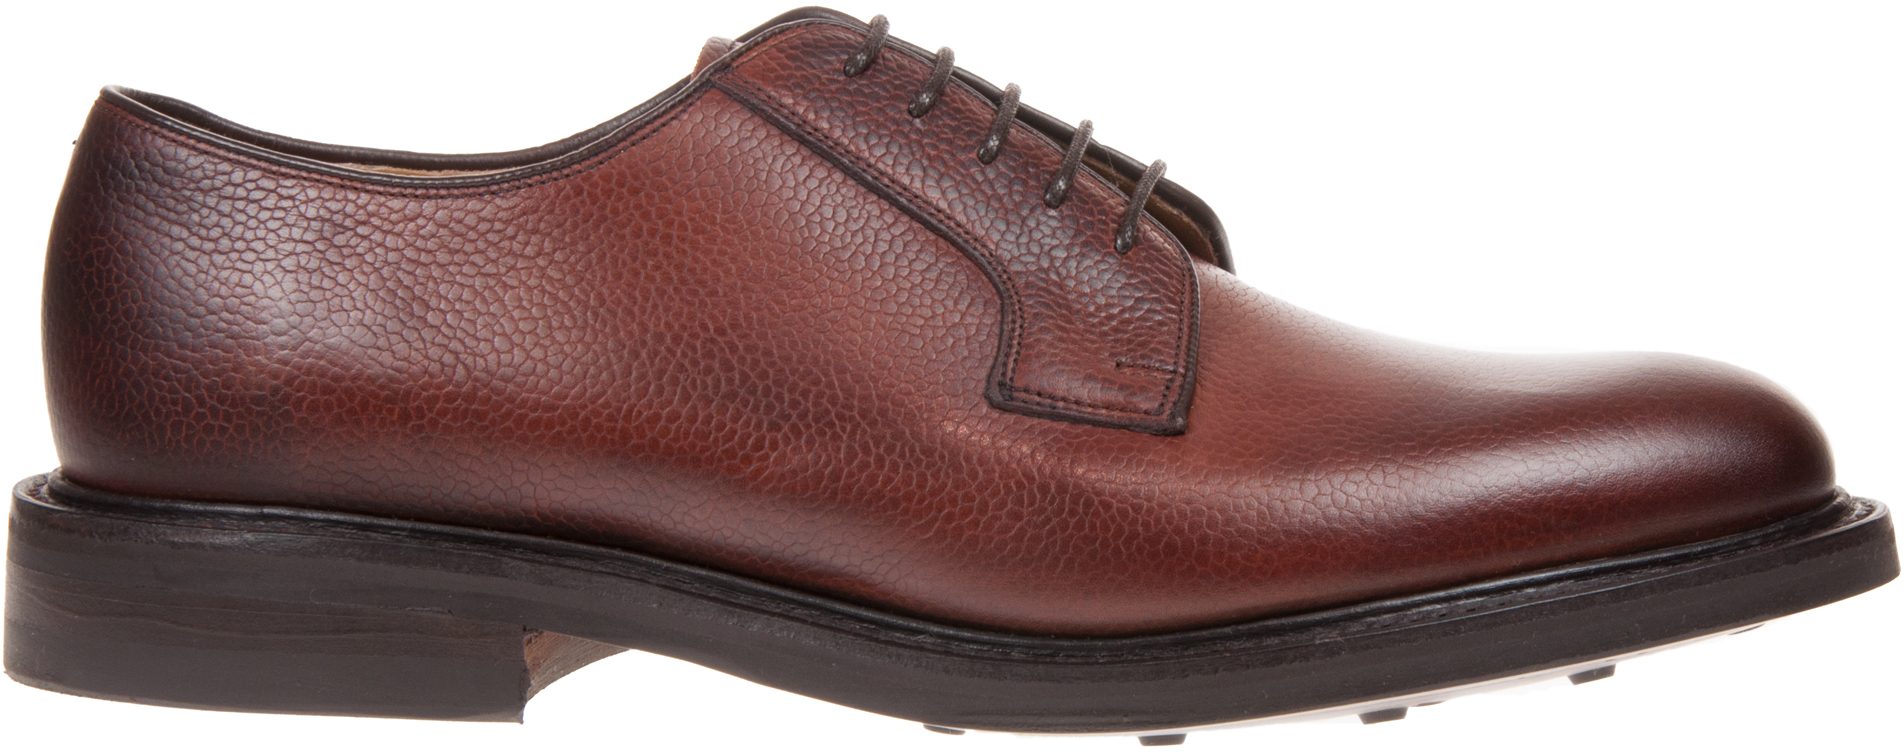 Barker Nairn Cherry Grain 927886 - Formal Shoes - Humphries Shoes